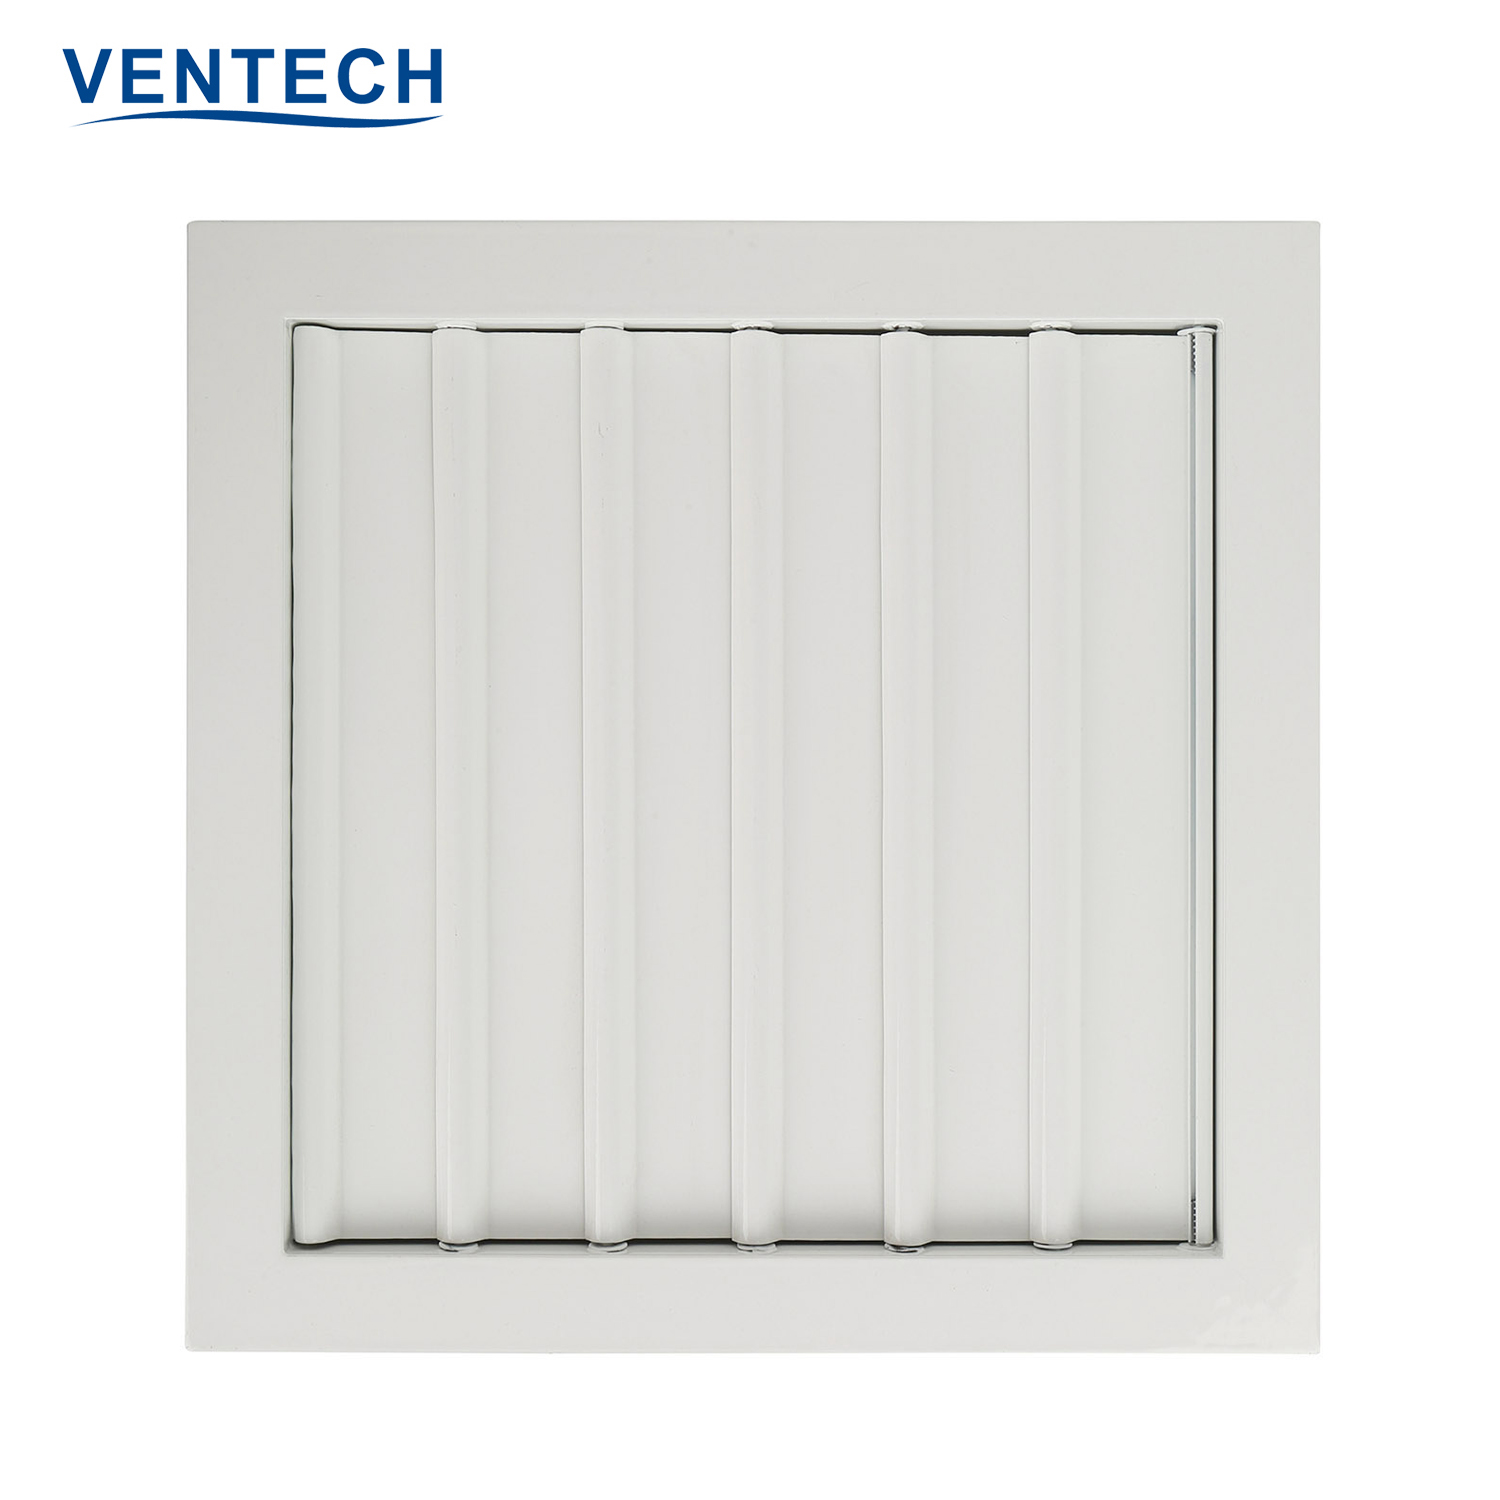 Ventech air intake louver company for office budilings-2